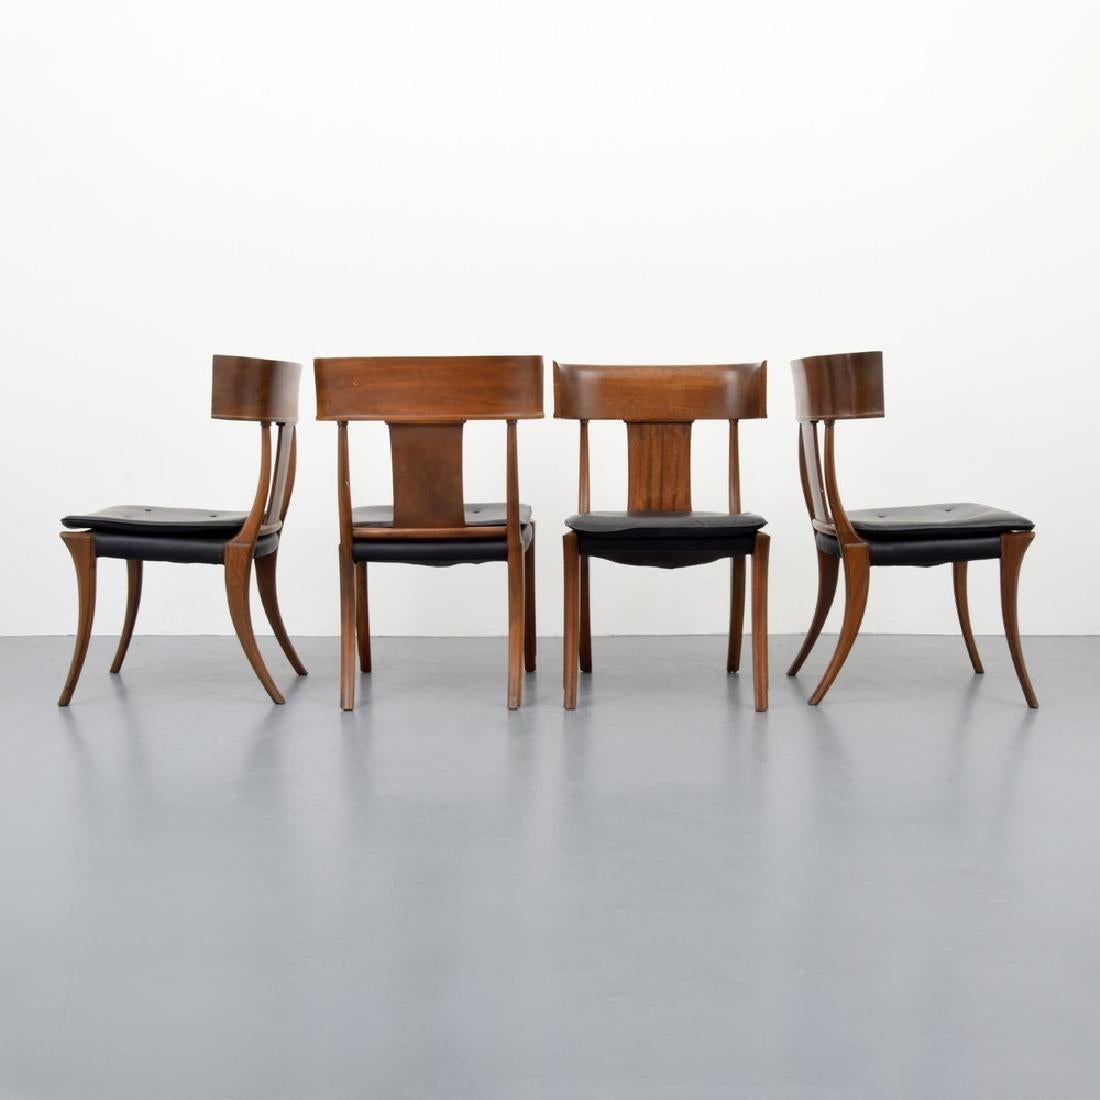 A set of eight Stewart & MacDougall klismos dining chairs created by Kipp Stewart and Stewart MacDougall. The concave crest rail, center splat, and side rails taper into splayed legs typical of the klismos design, and all are made from walnut. The